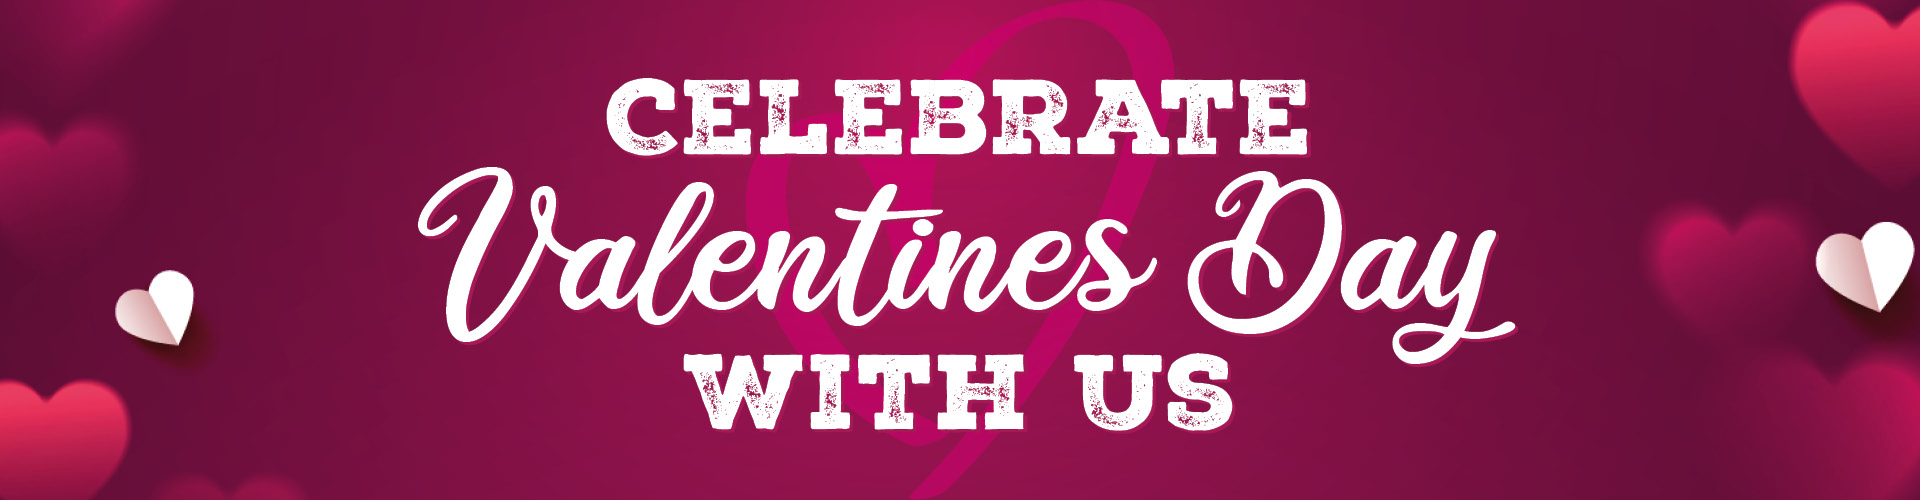 Celebrate Valentines Day With Us